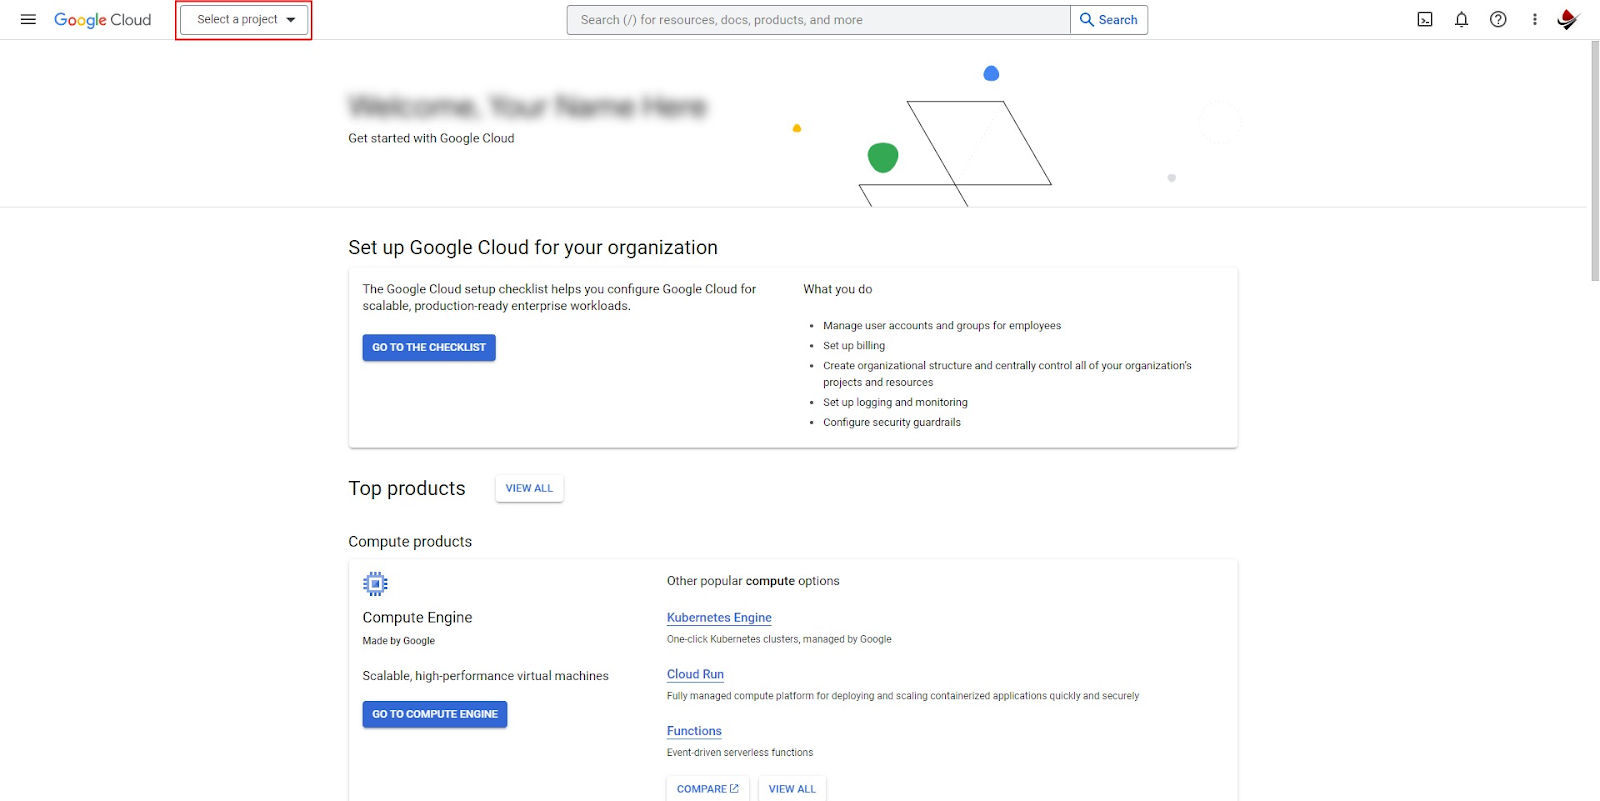 Google Groups: Create and Customize a Google Group